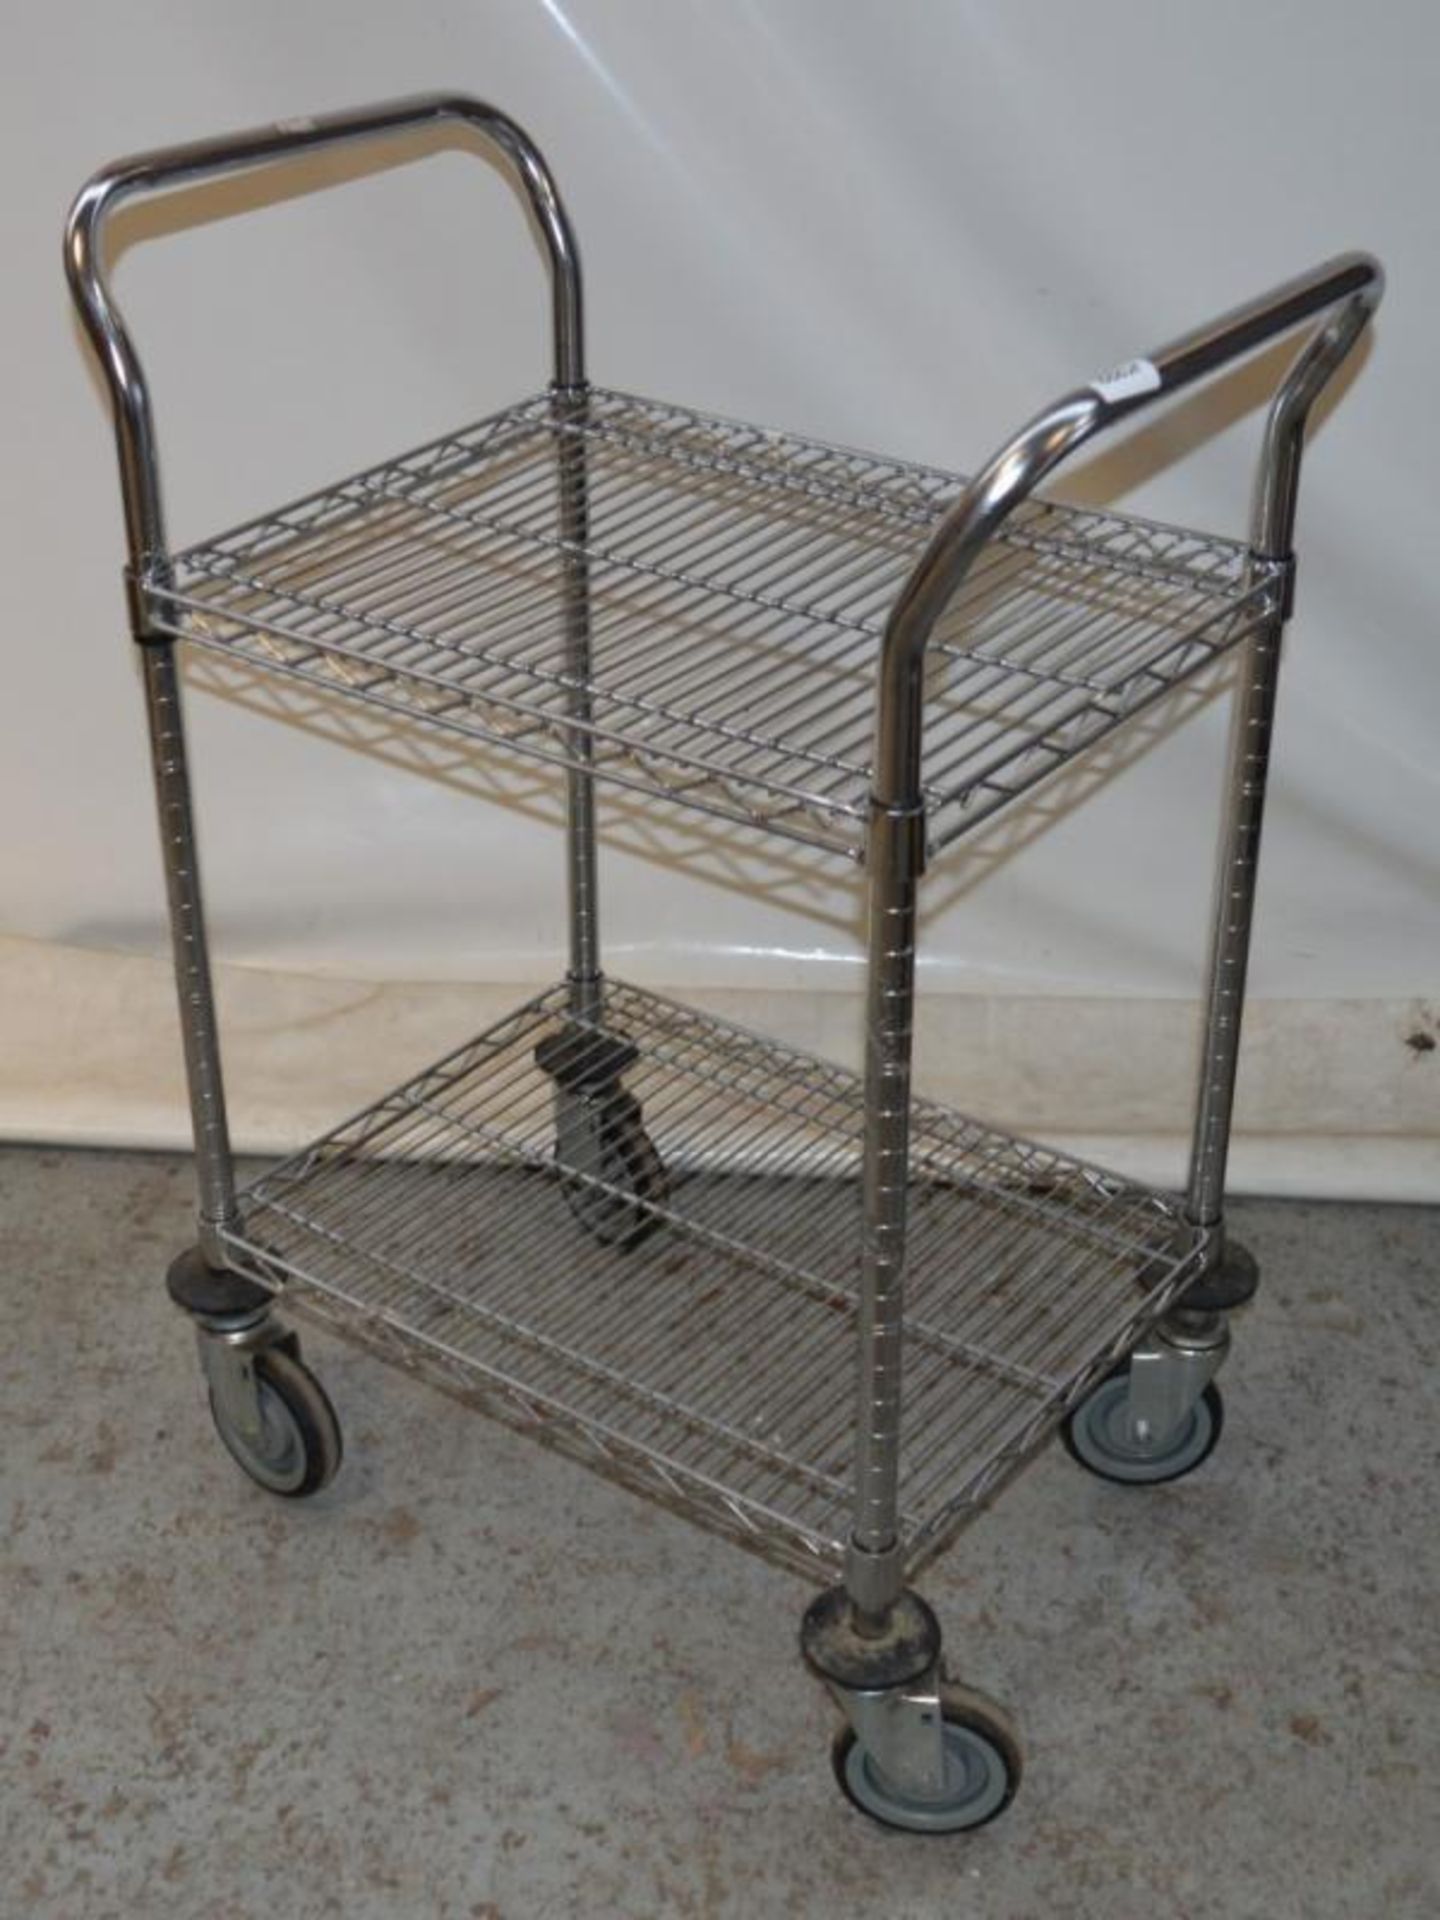 1 x Stainless Steel Commercial Wire Trolley on Castors - H99 x W71 x D46 cms - CL282 - Ref J1222 - L - Image 3 of 3